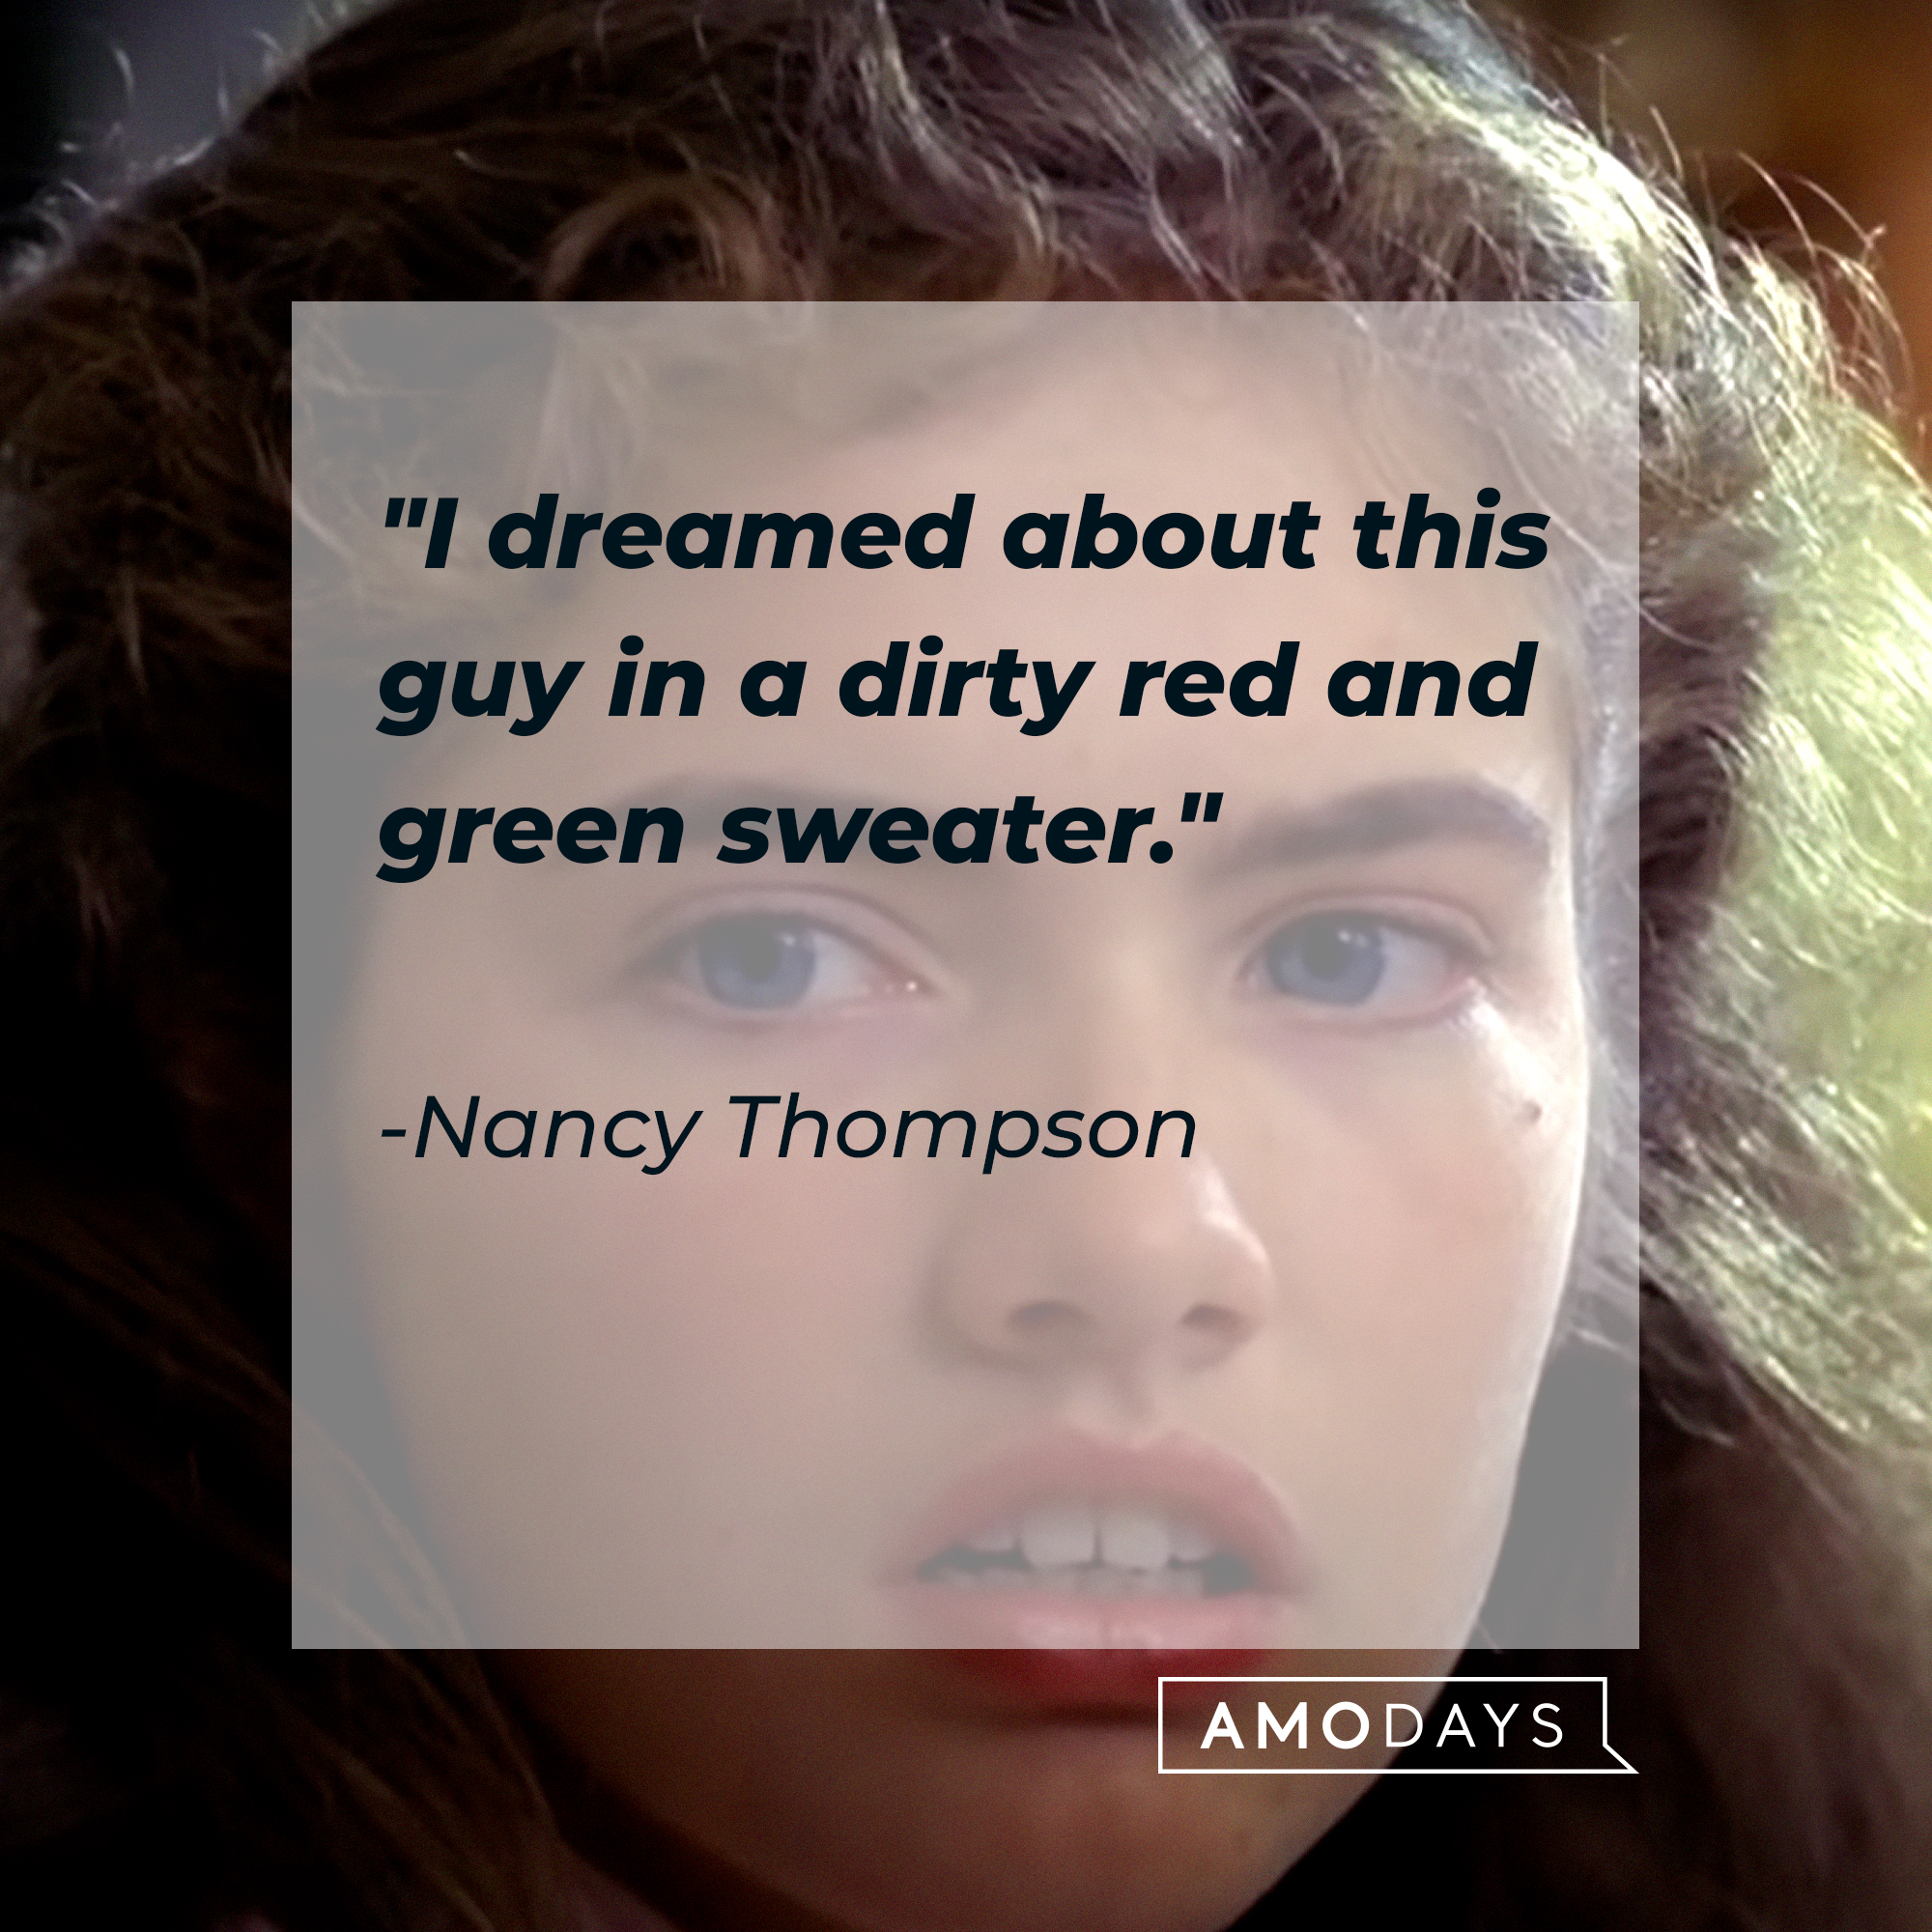 Nancy Thompson's quote: "I dreamed about this guy in a dirty red and green sweater." | Source: Facebook/ANightmareonElmStreet